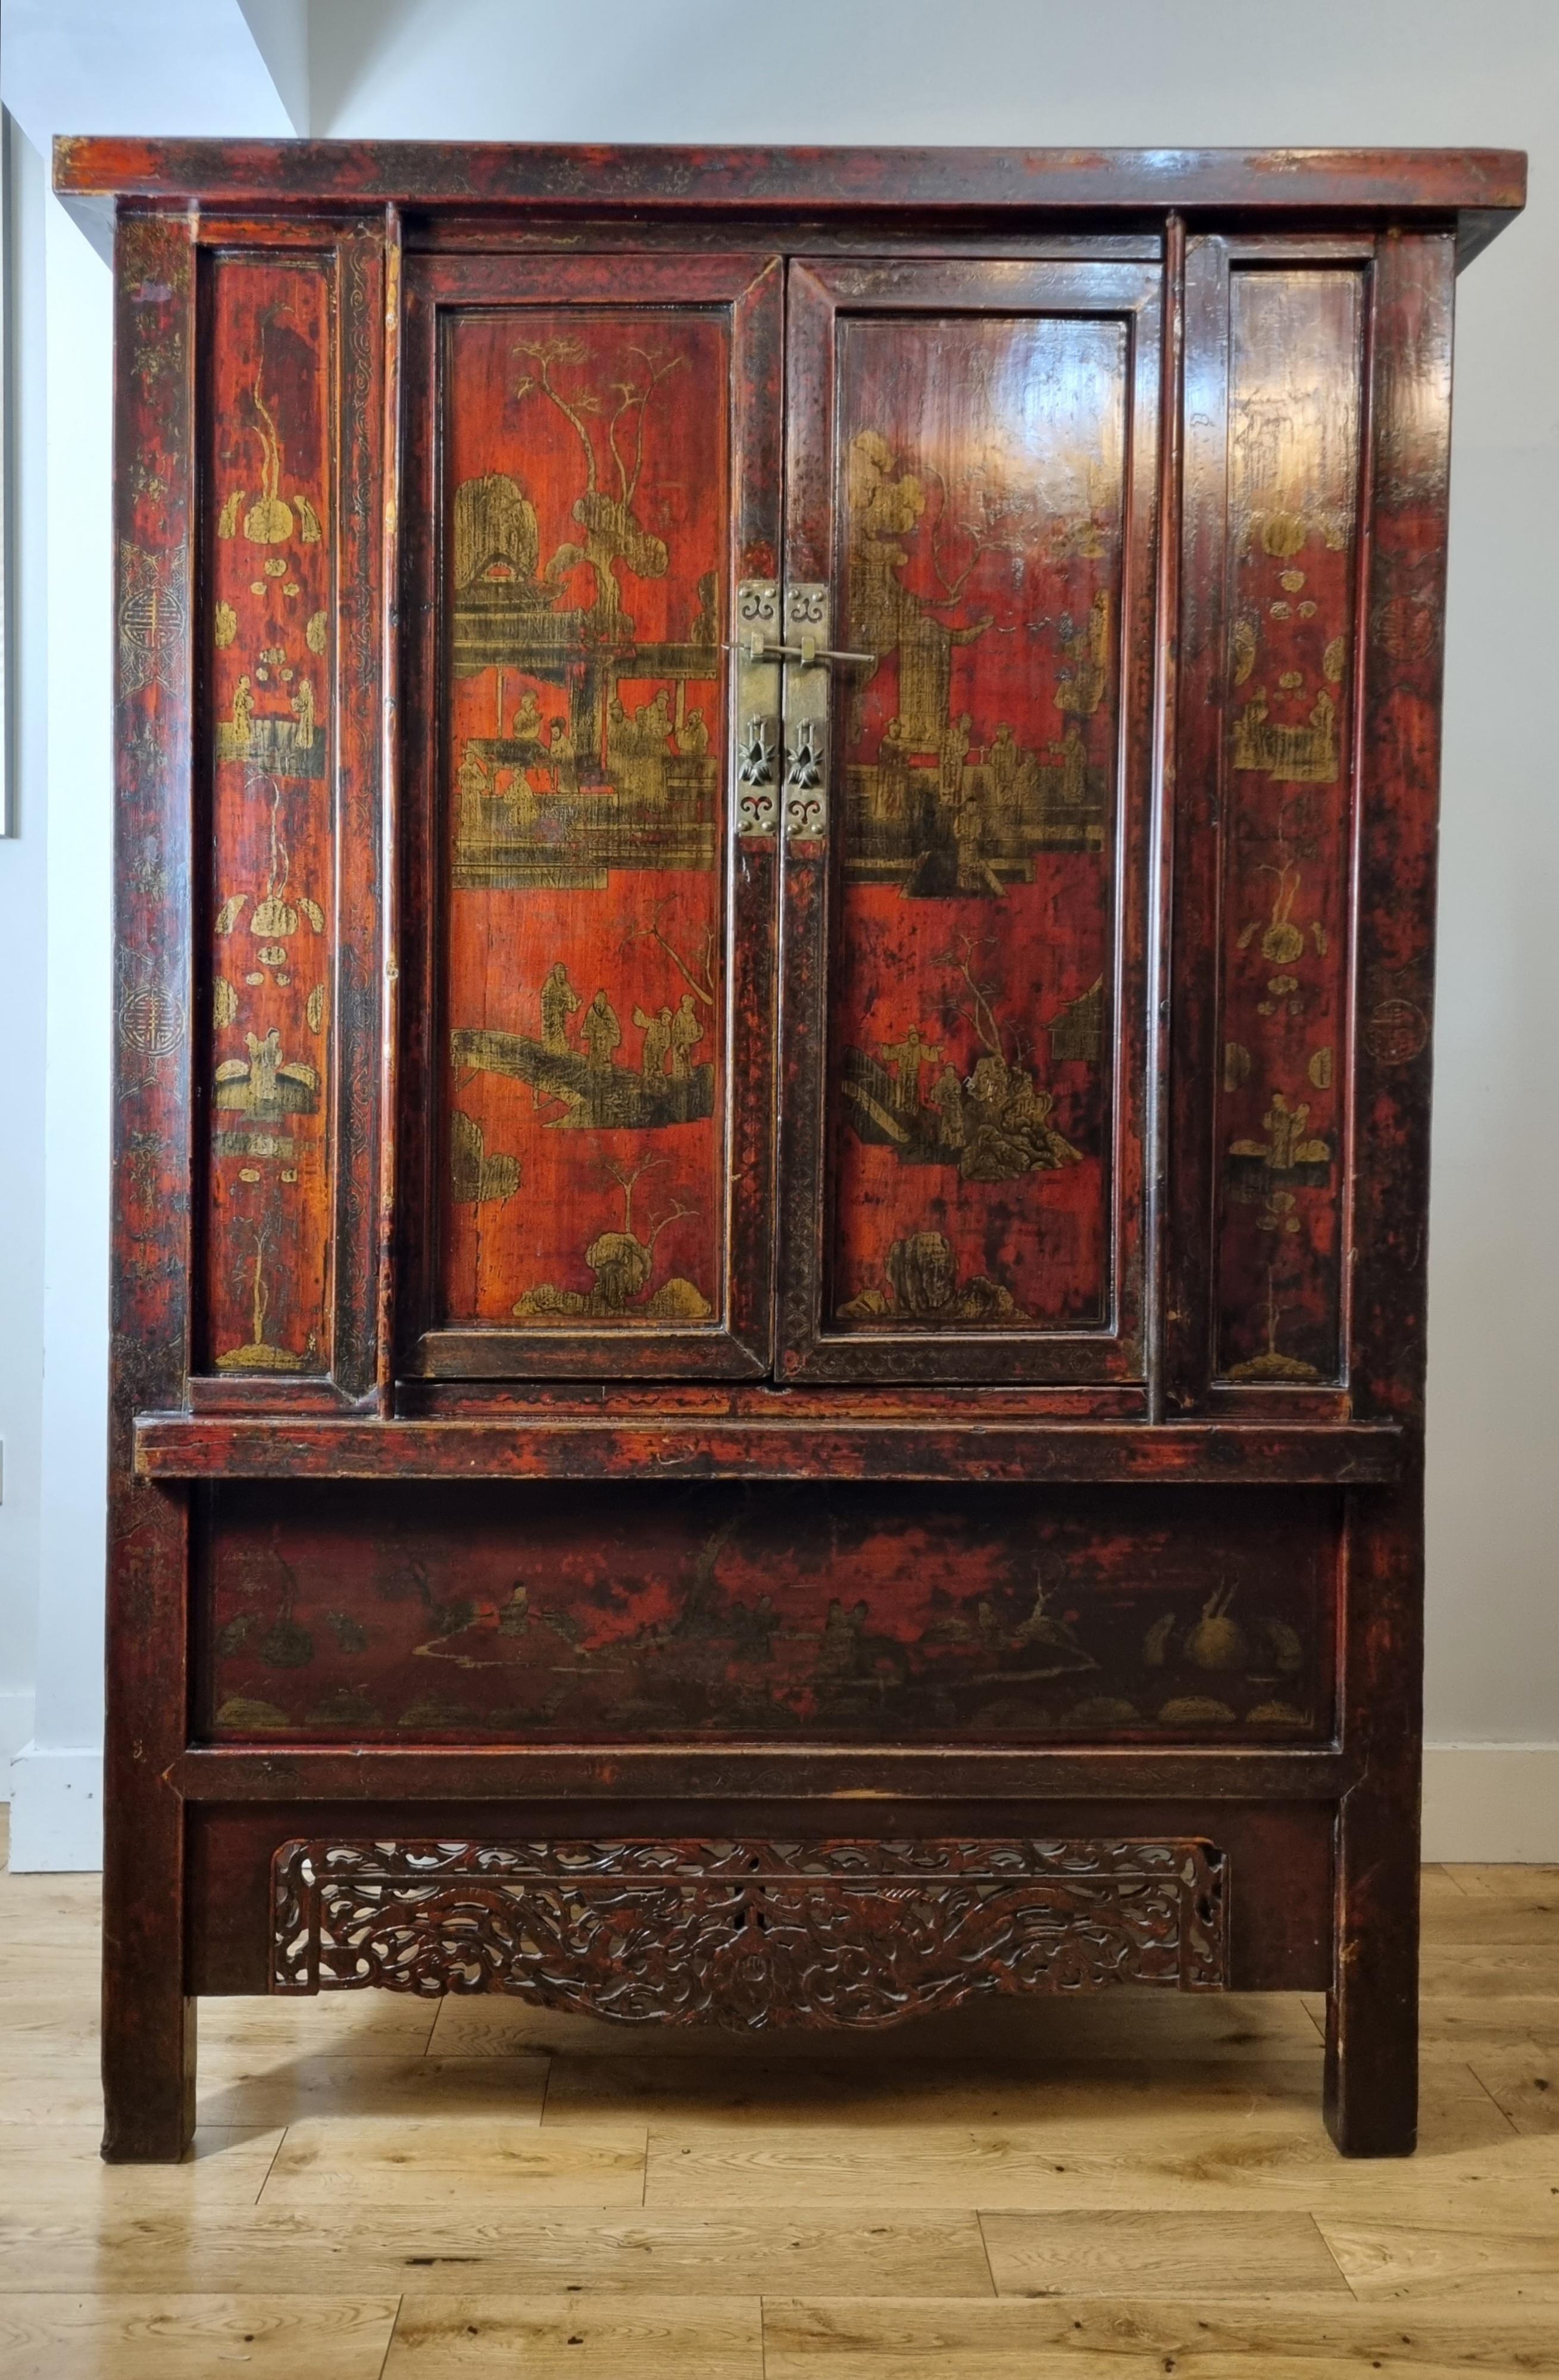 18th-century Chinese two-door red lacquered cabinet from Shanxi, China, dating back to the Qing period .

This stunning cabinet is embellished with gilding and hand-painted scenes to the panels , beautifully carved apron.

The cupboard retains its